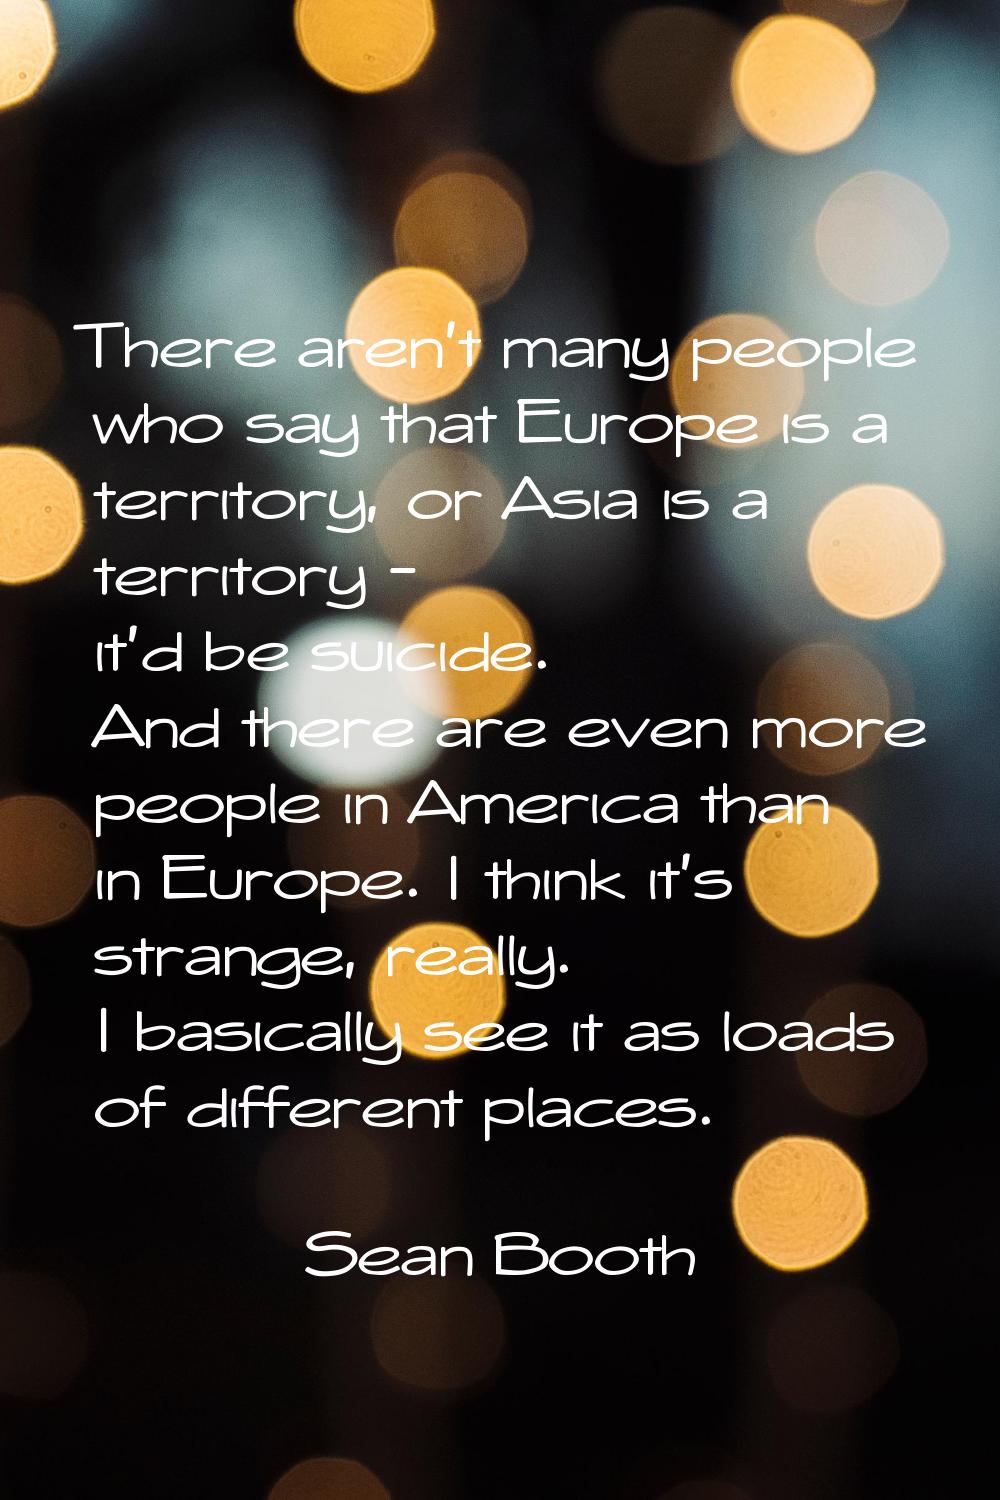 There aren't many people who say that Europe is a territory, or Asia is a territory - it'd be suici